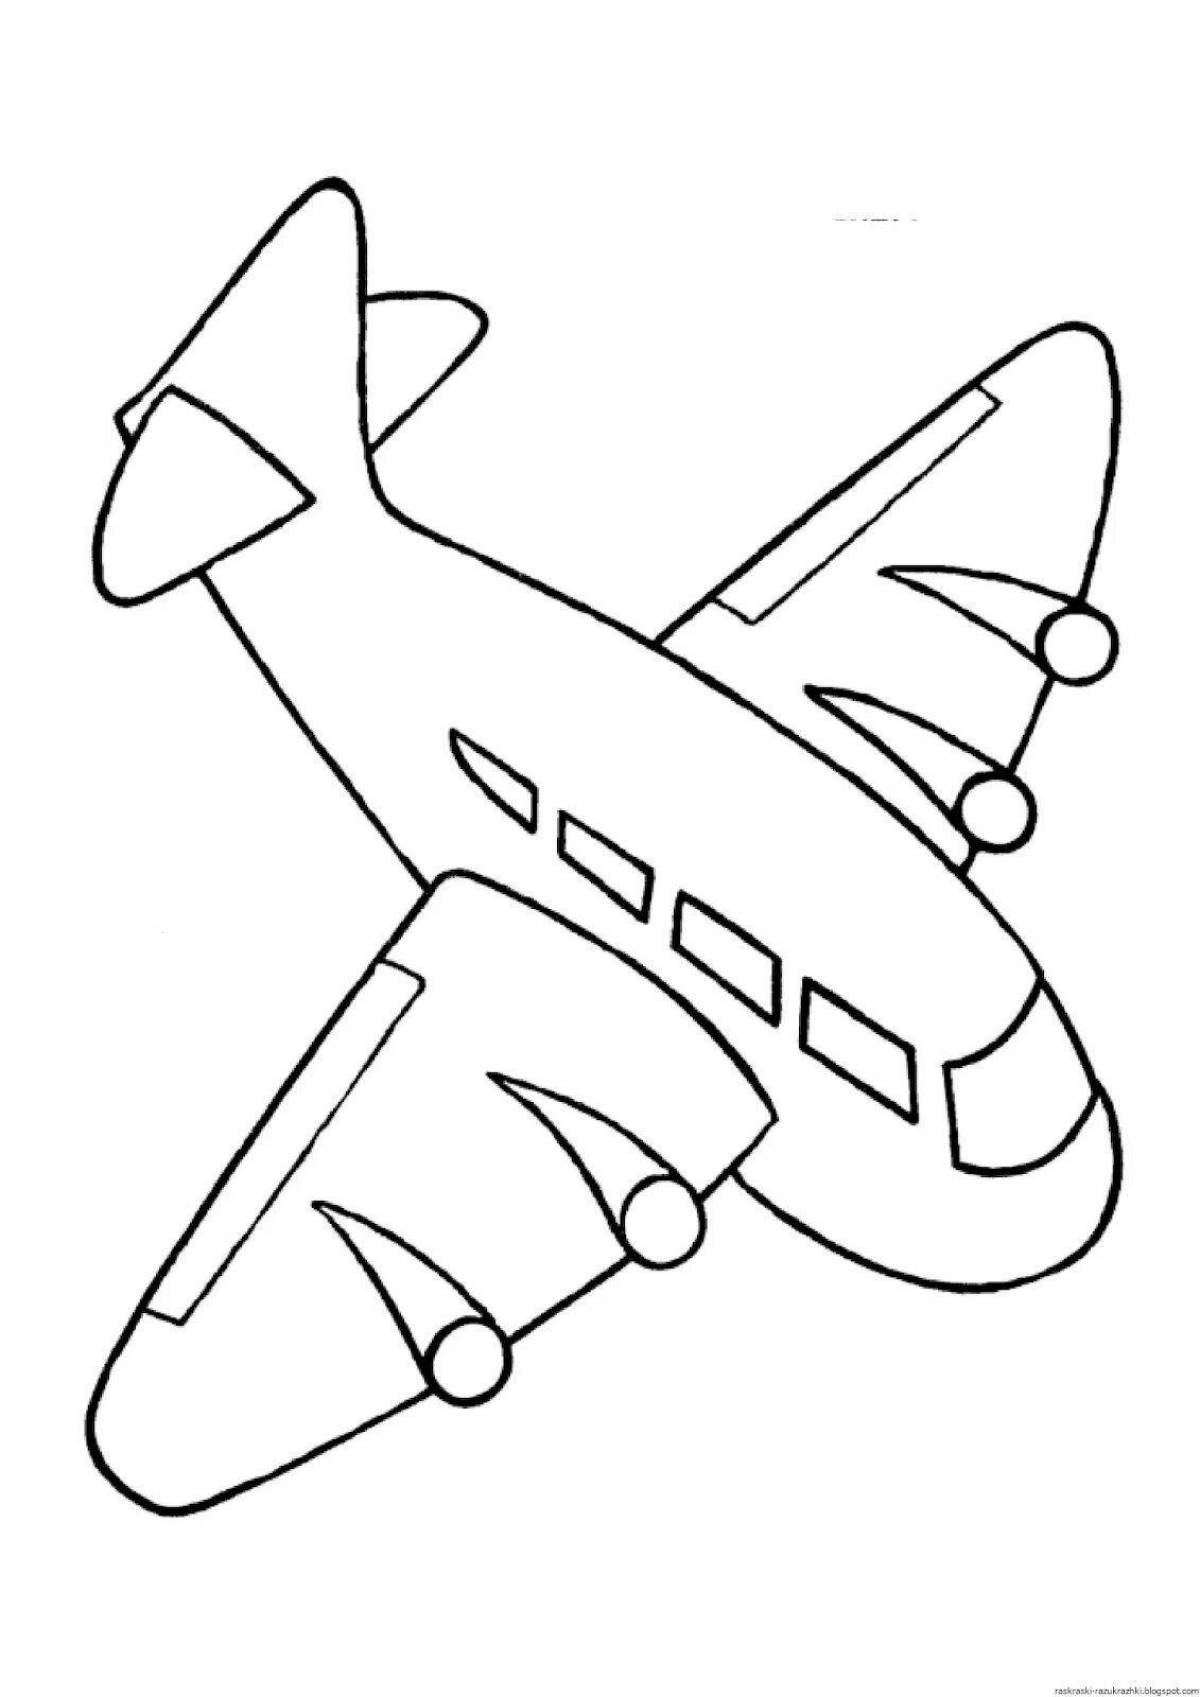 Creative airplane coloring book for kids